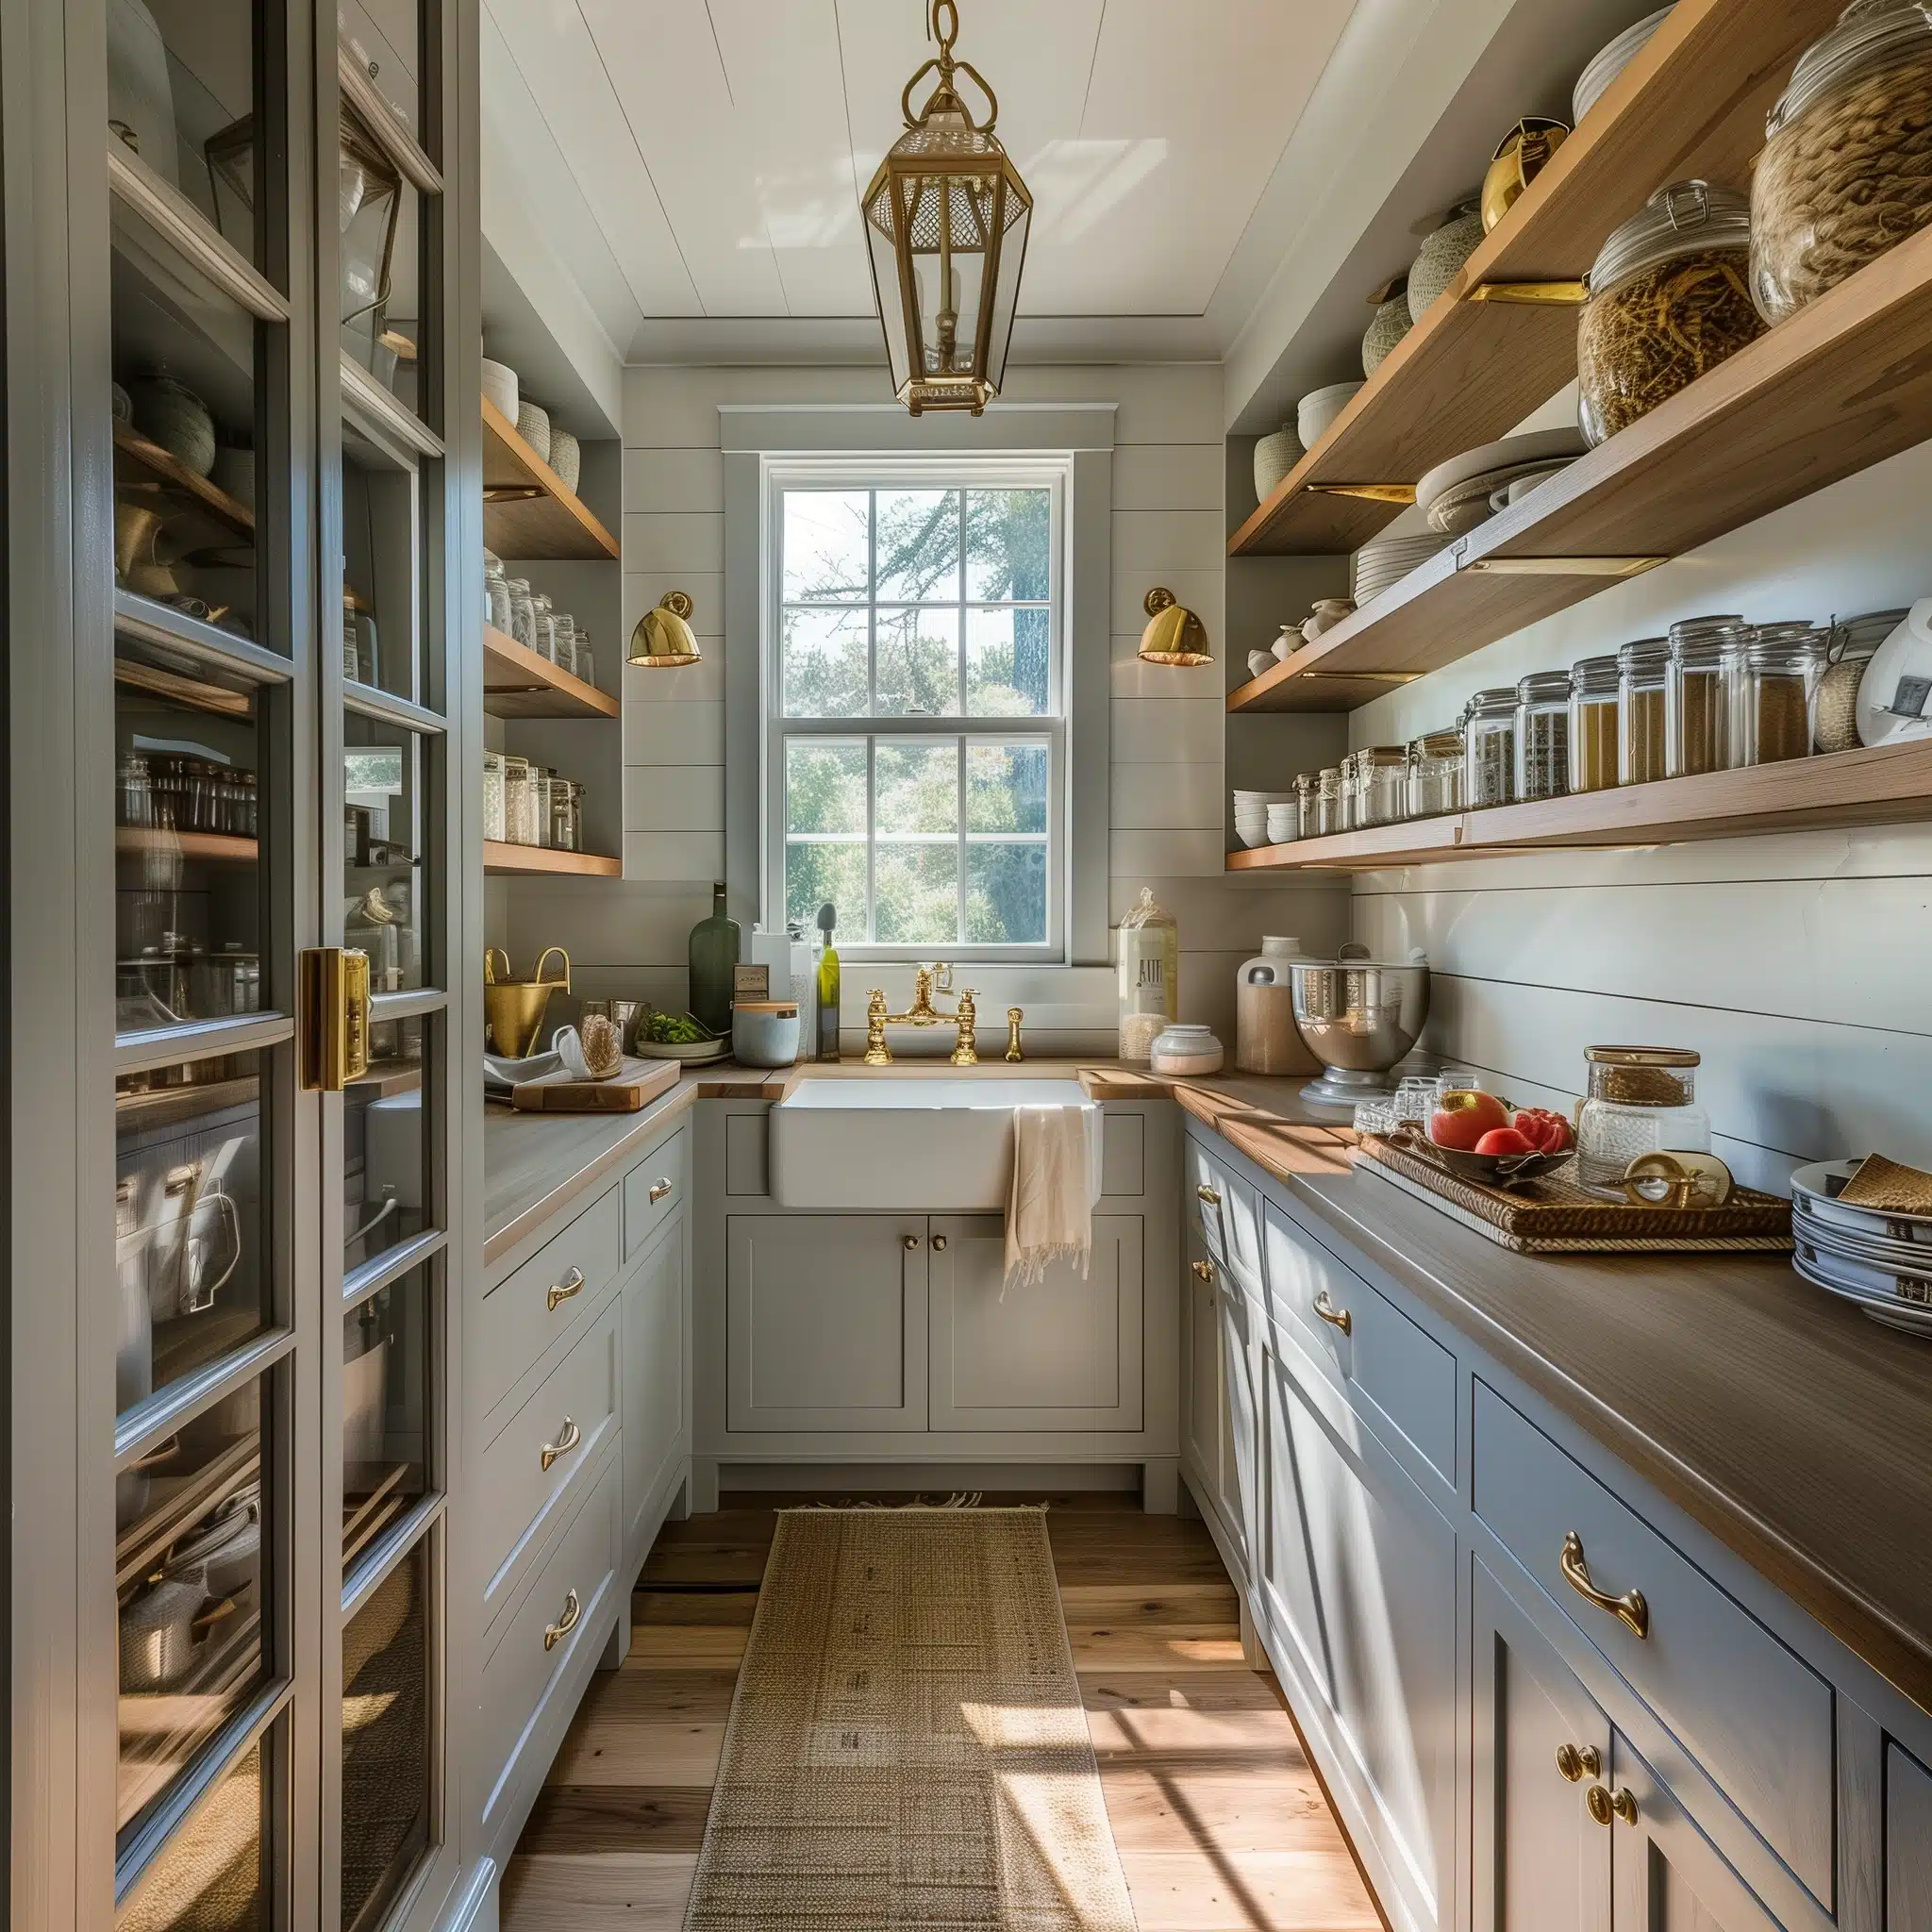 The cabinet color, natural light, natural woods and sturdy shiplap bring cozy, coastal warmth to this scullery.